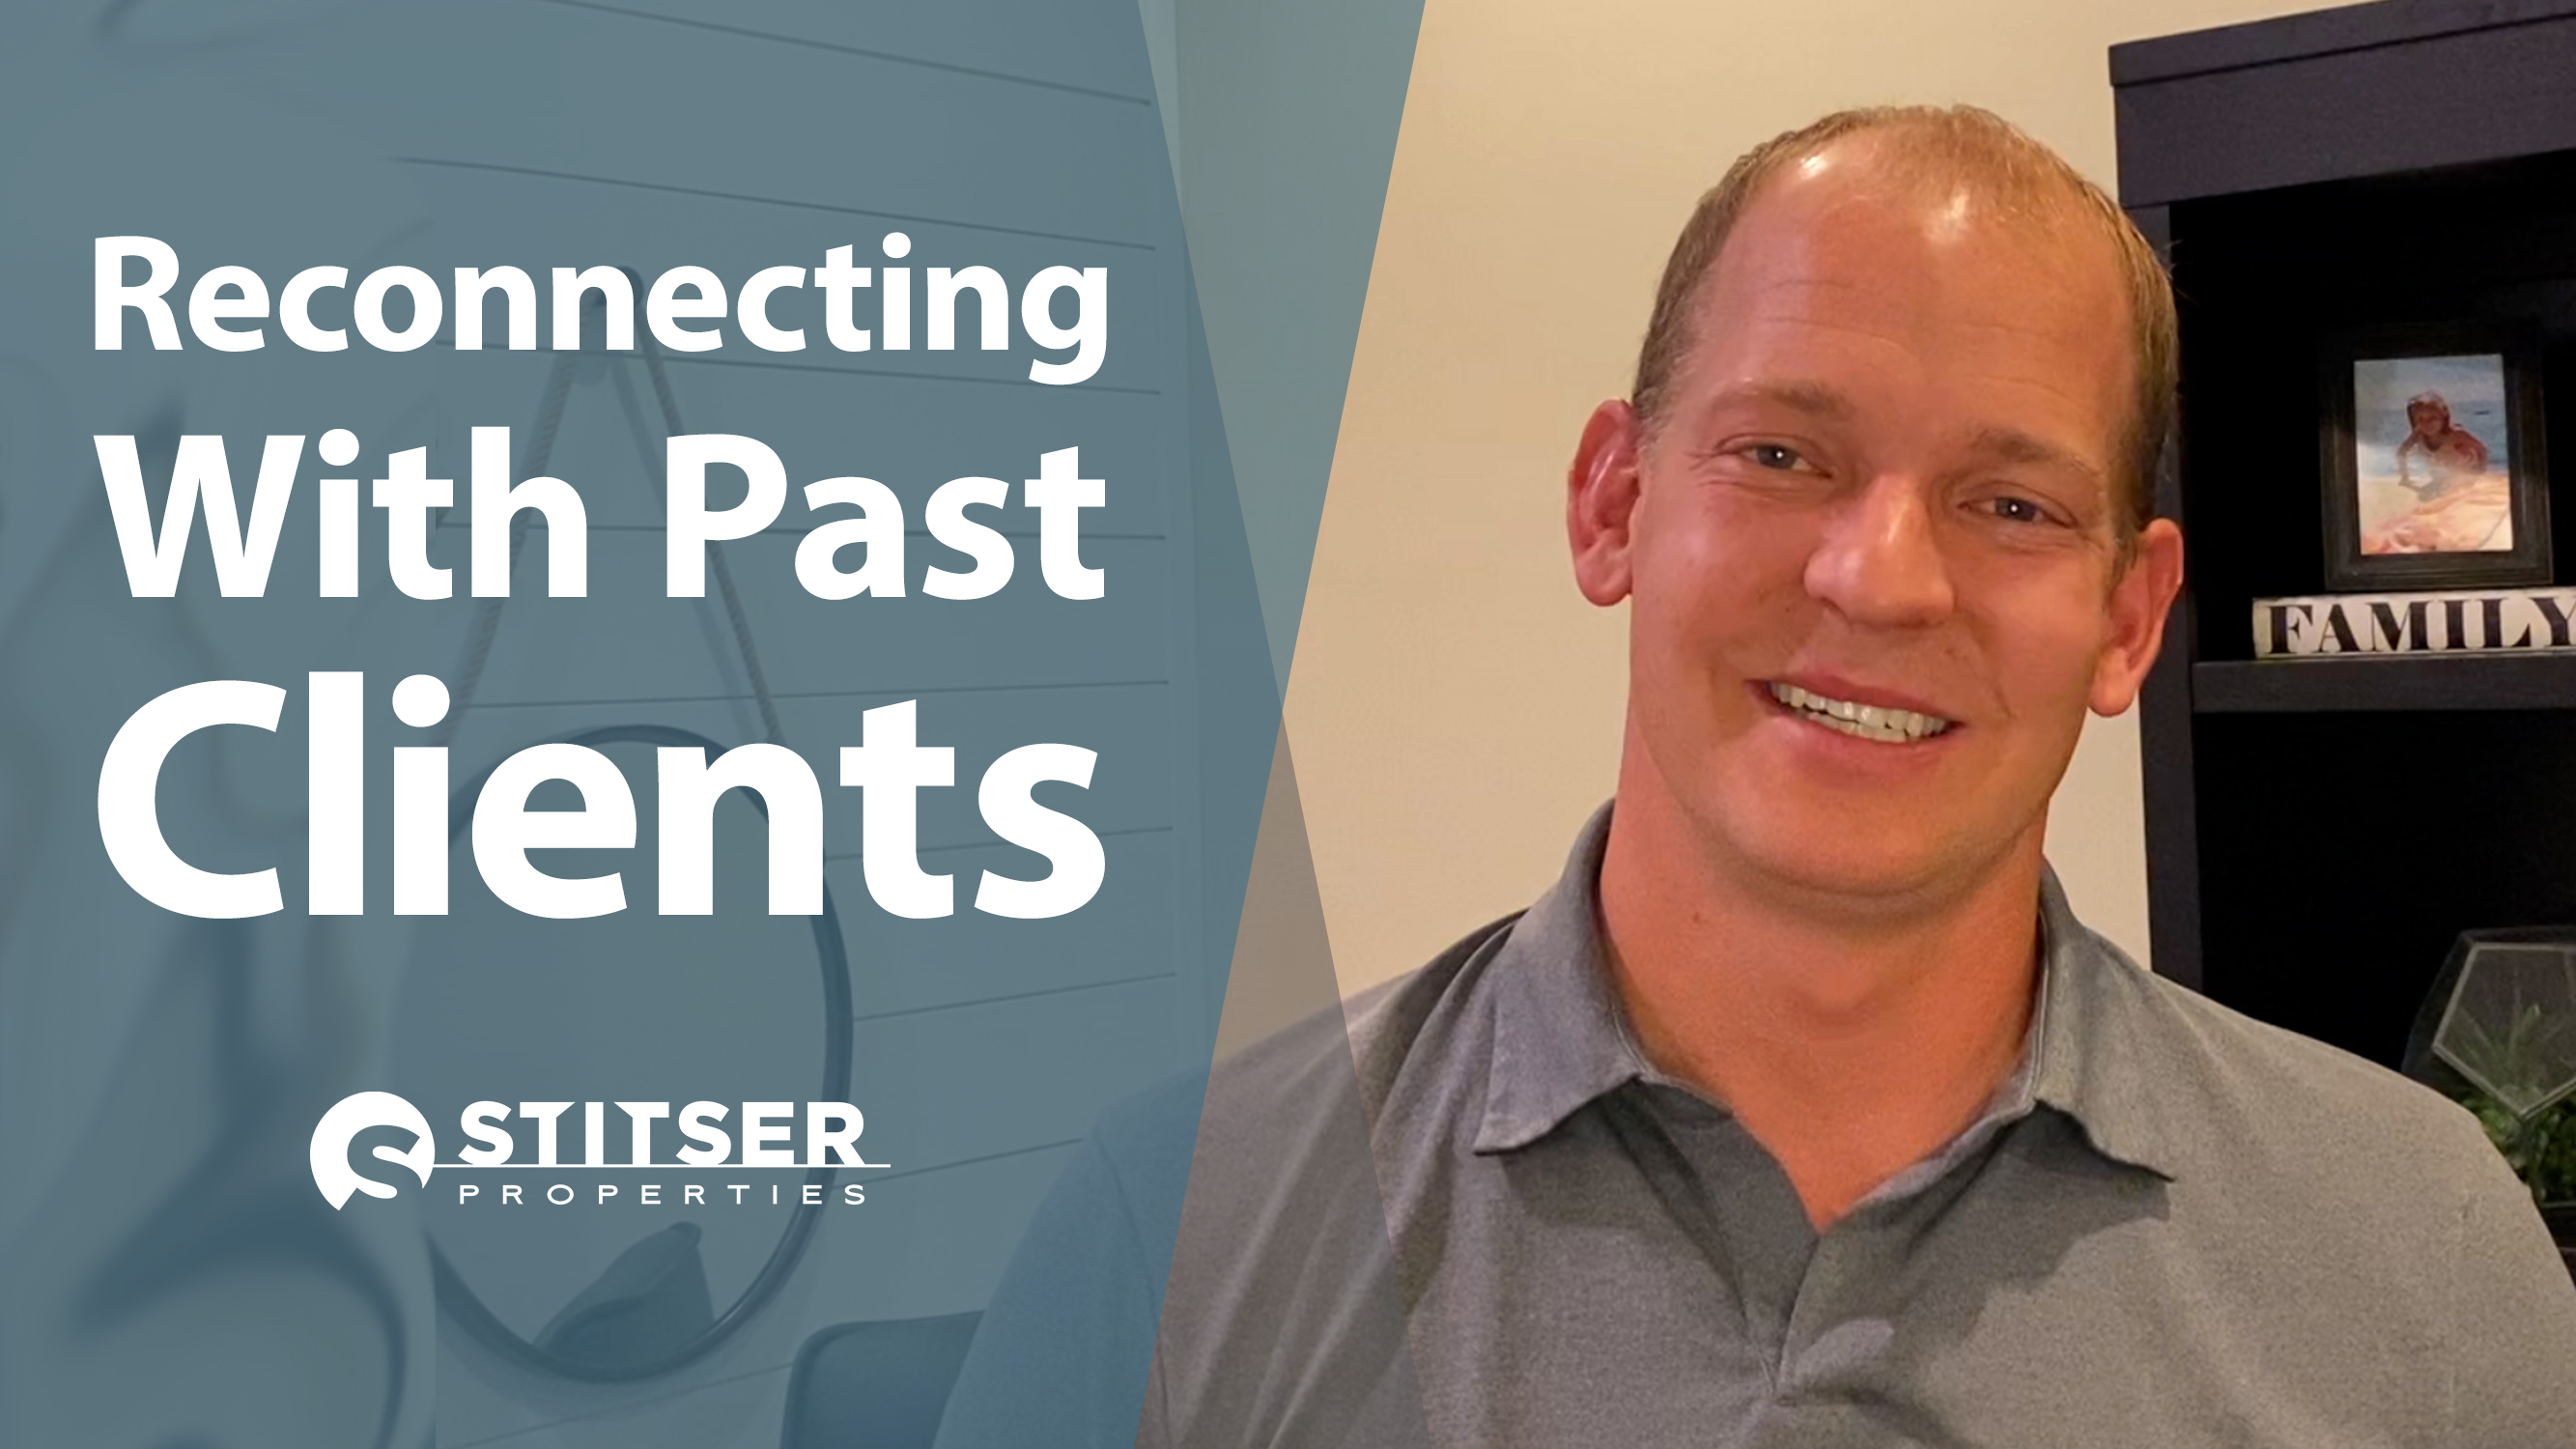 Q: How Do You Reconnect With Long-Lost Clients?